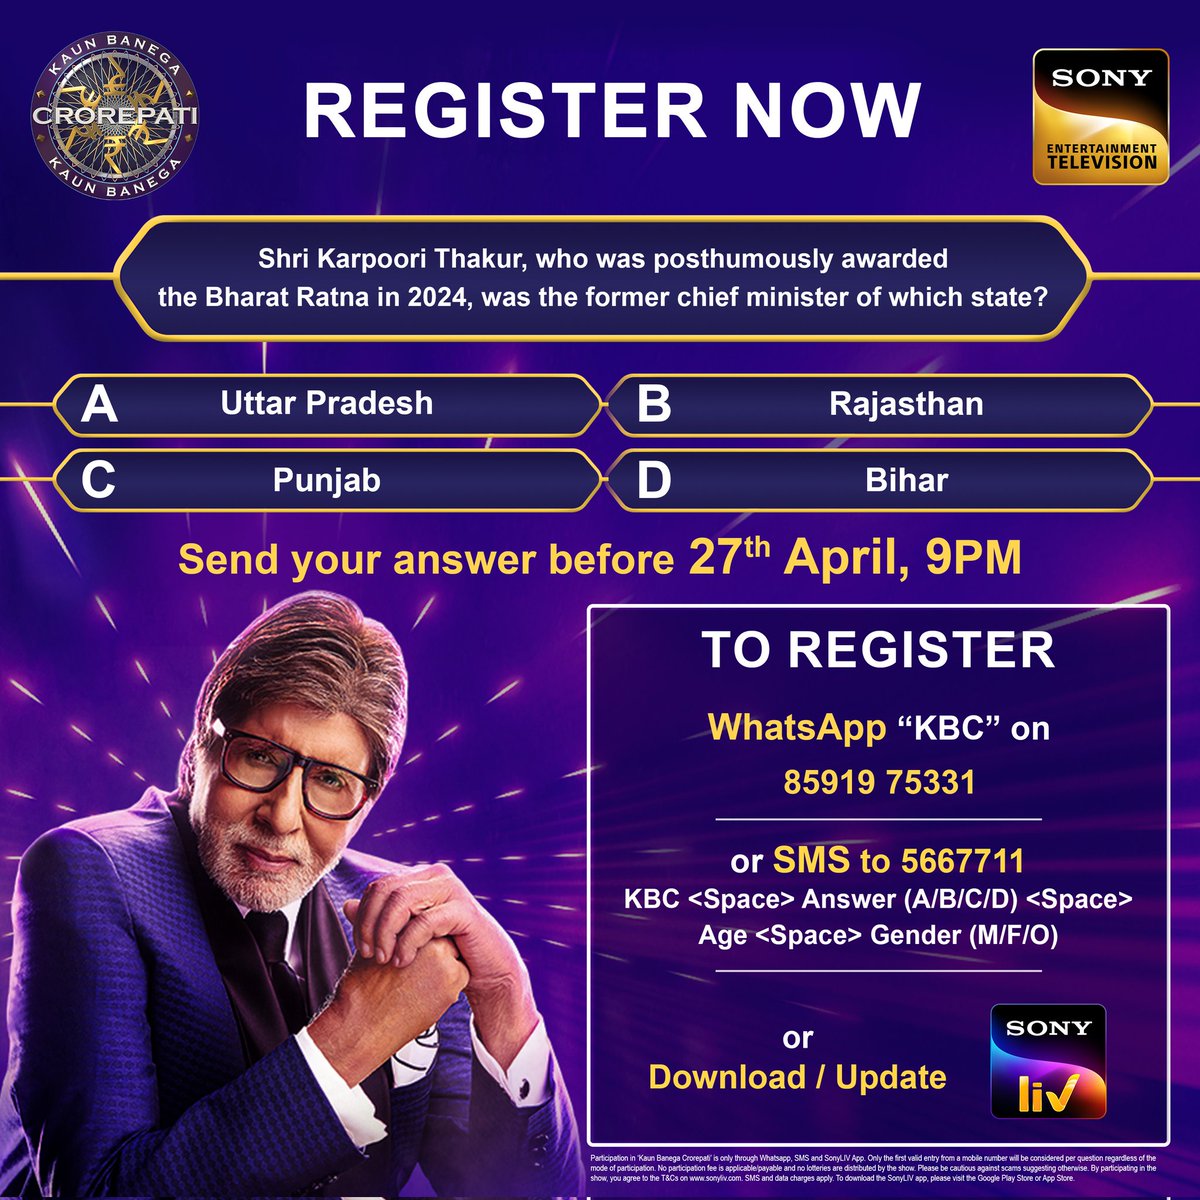 Here is the first question to register for KBC! To register for KBC, you need to send your answer before tonight, 9 pm Modes of registration - Whatsapp 'KBC' on 8591975331 OR SMS to 5667711 KBC <space> Answer (A/B/C/D) <space> Age <space> Gender (M/F/O) OR Download/Update…